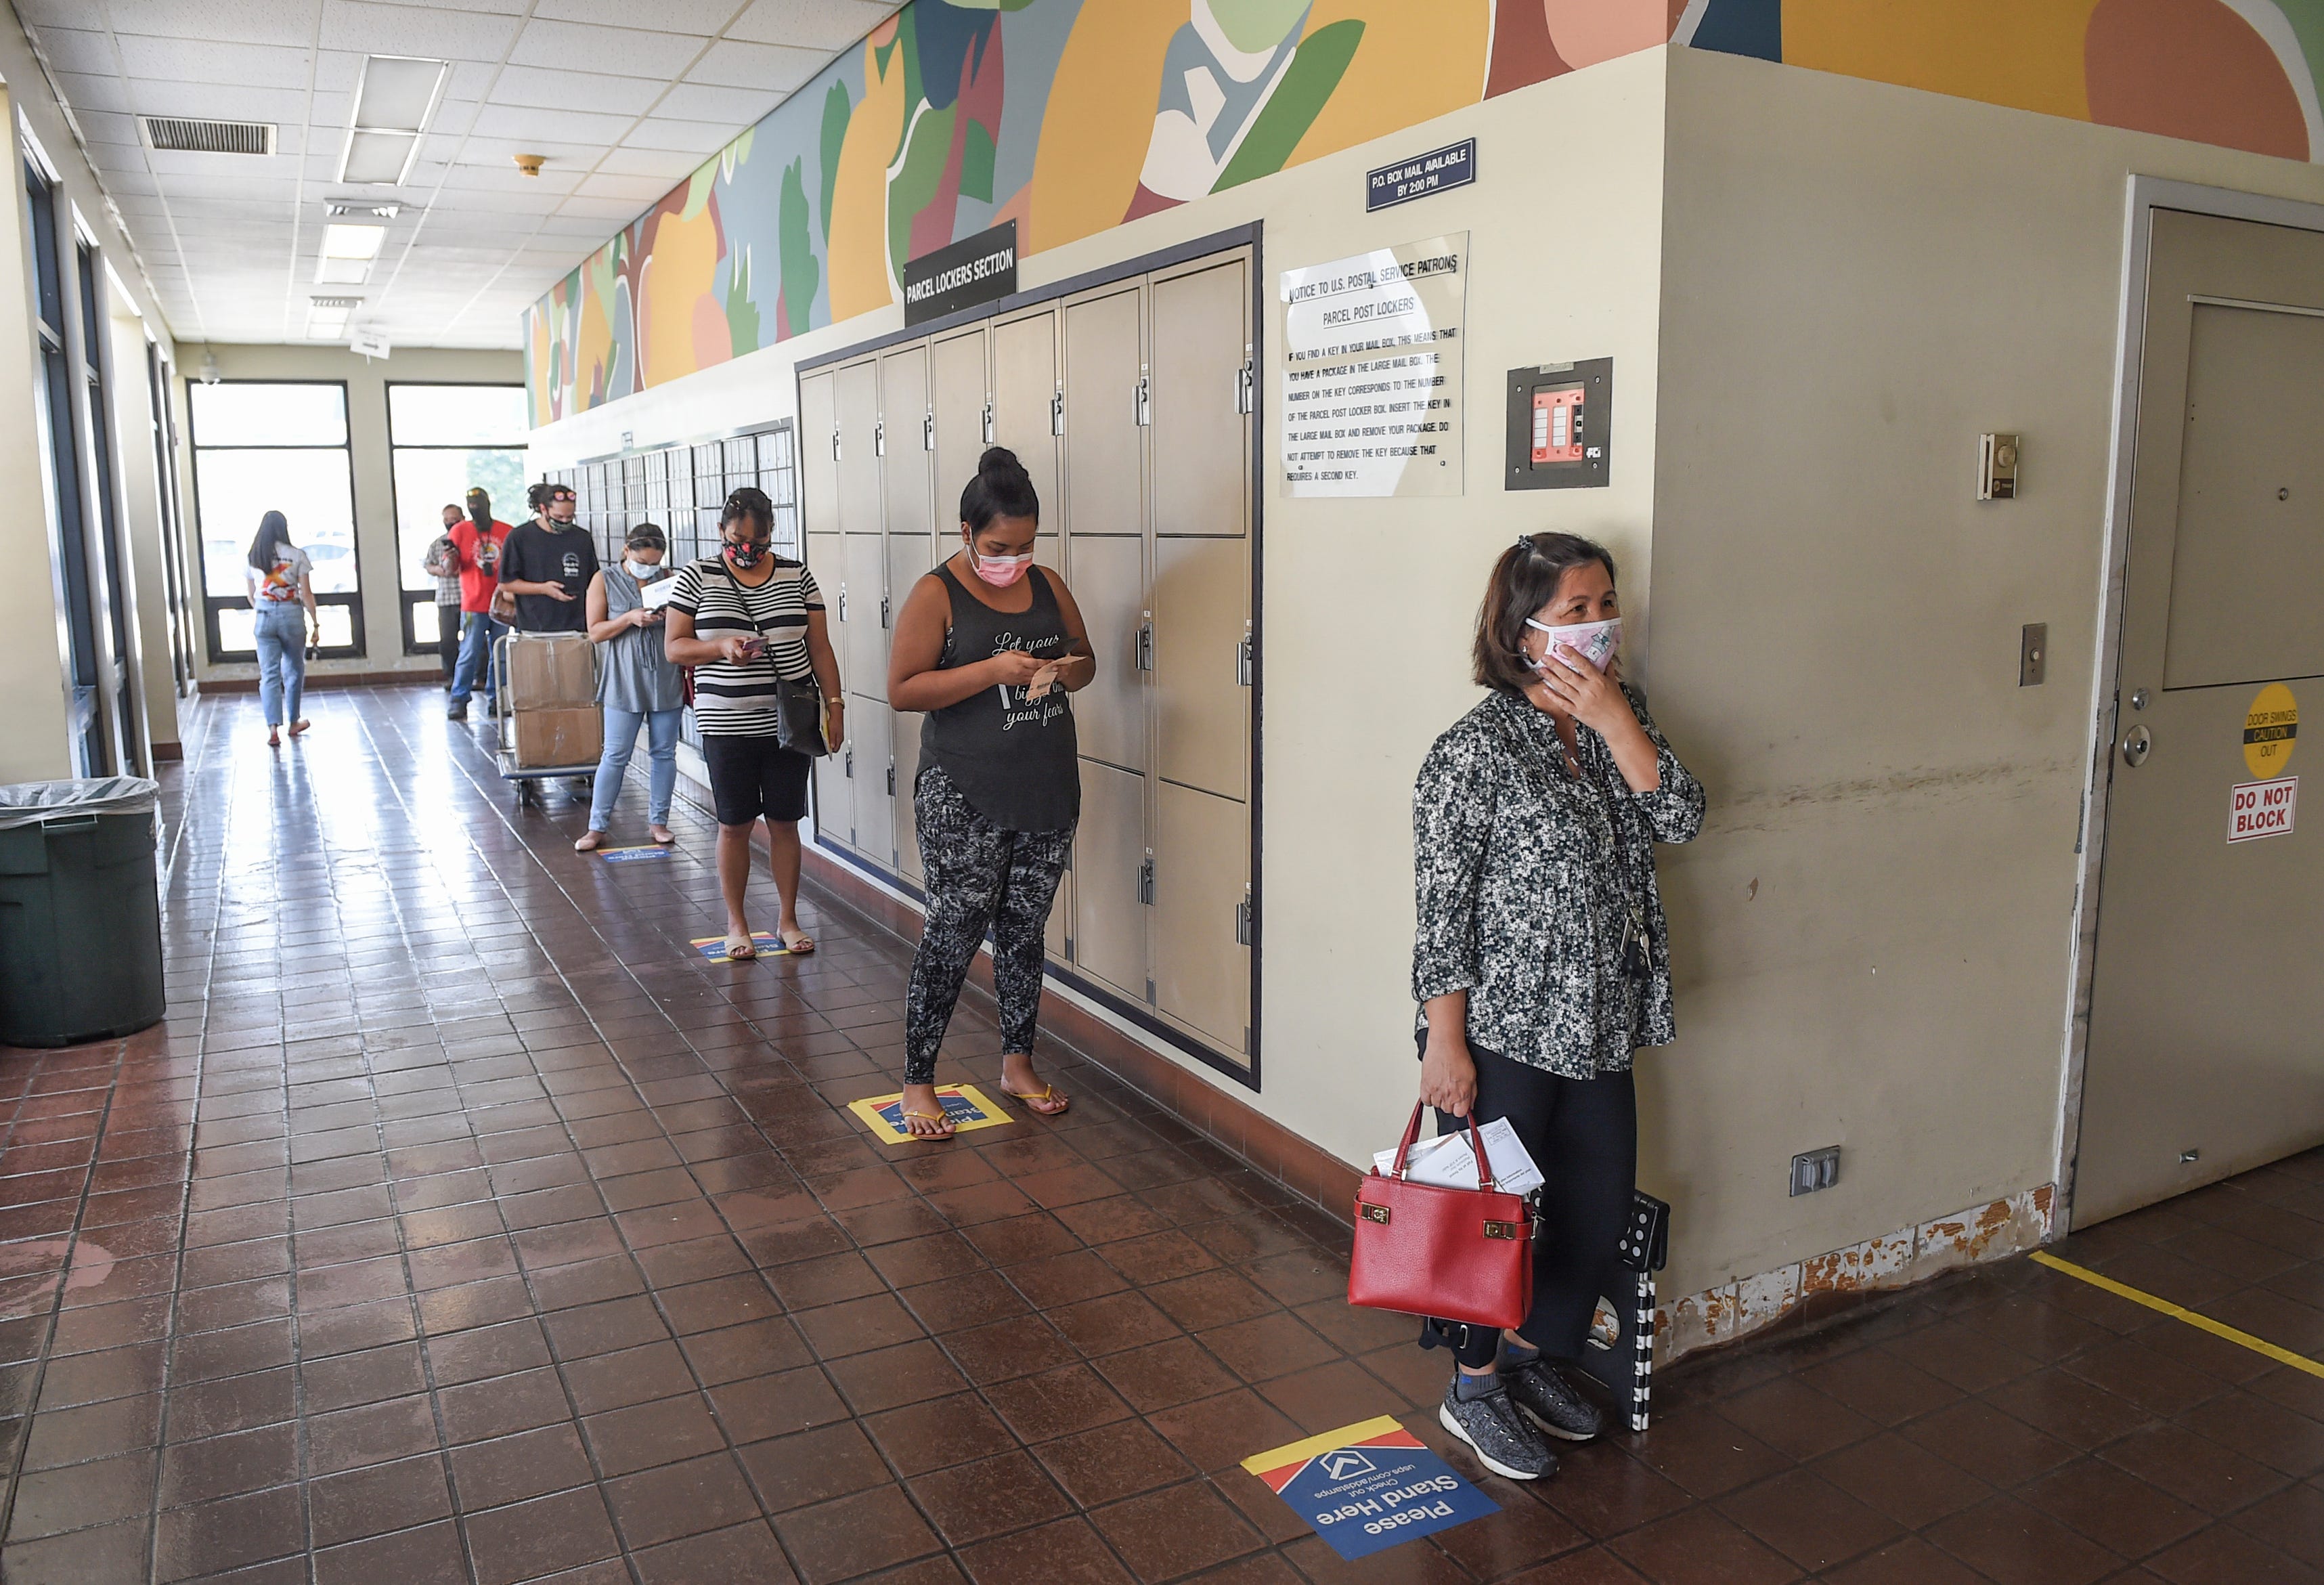 Customers line up while following social distancing guidelines at the U.S. Postal Service's Tamuning location on Sept. 25, 2020.